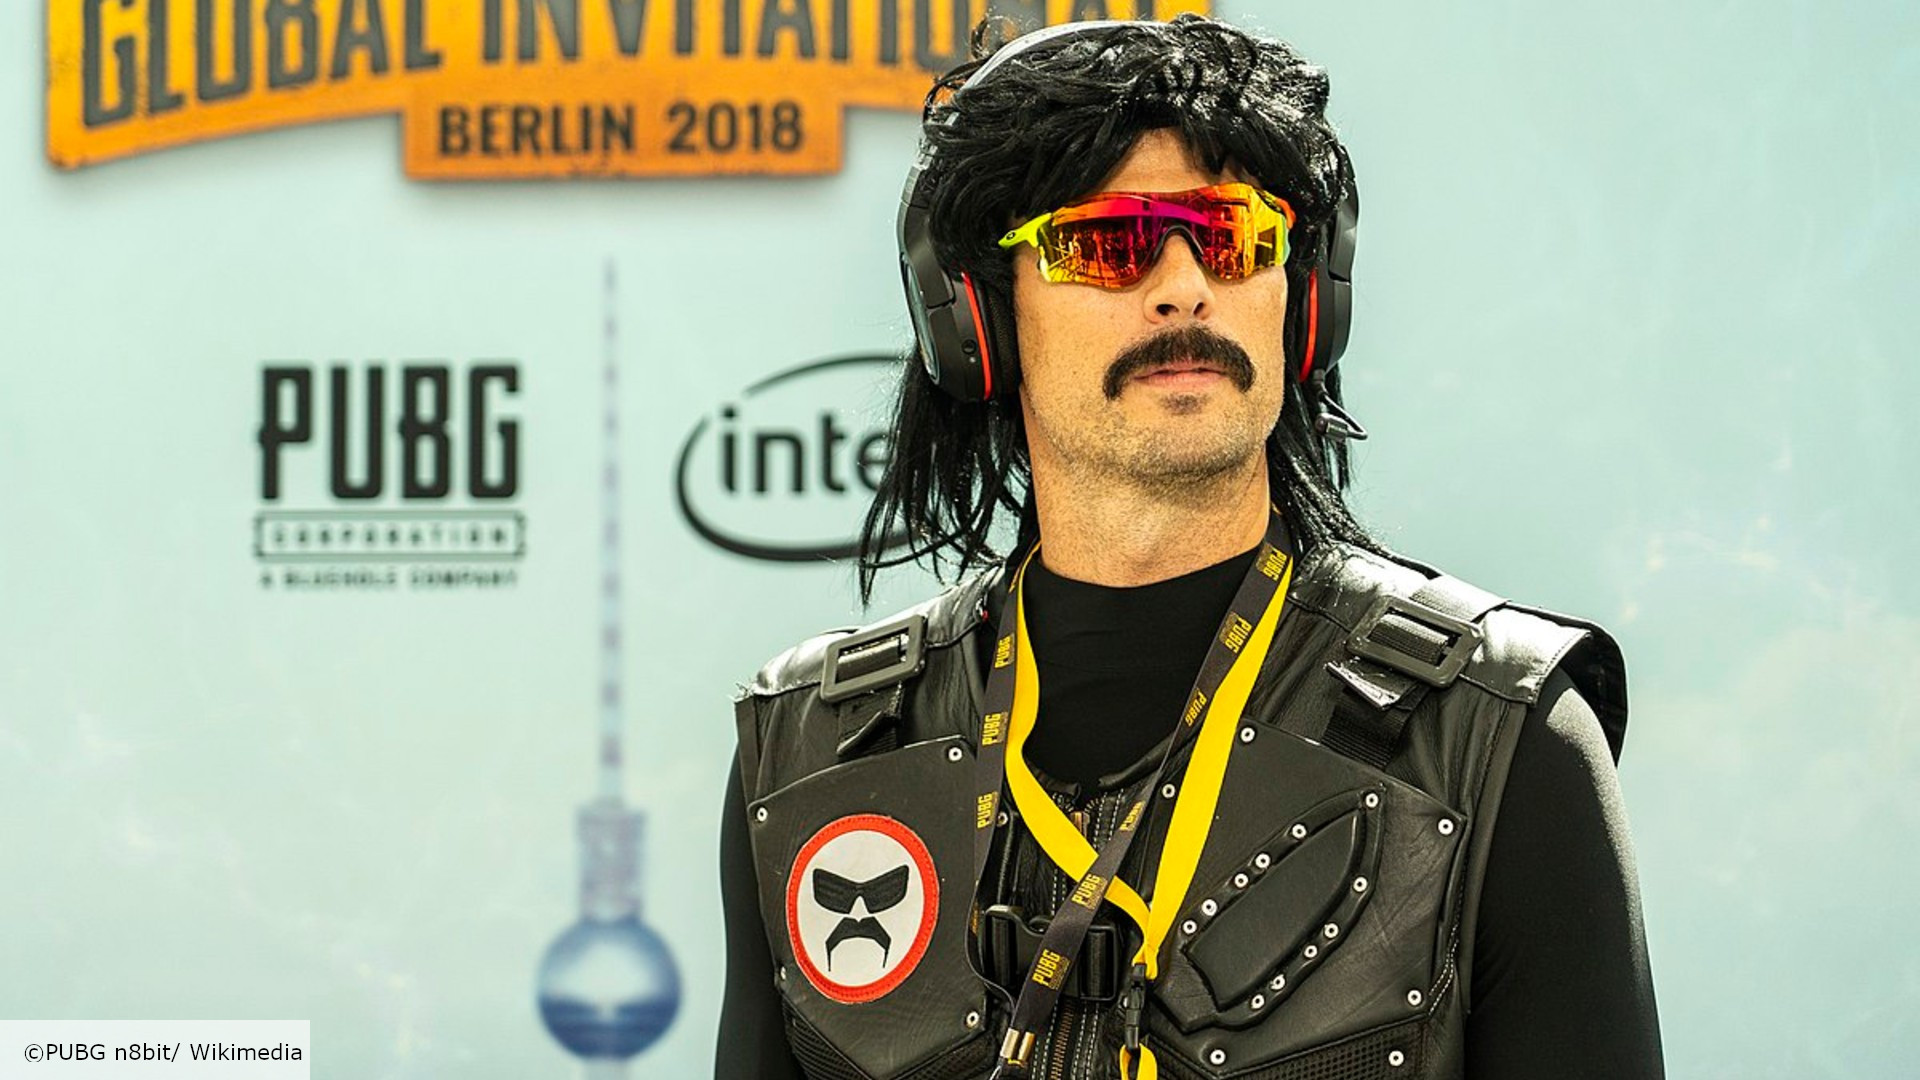 is Dr Disrespect? Net worth, settings, The Loadout